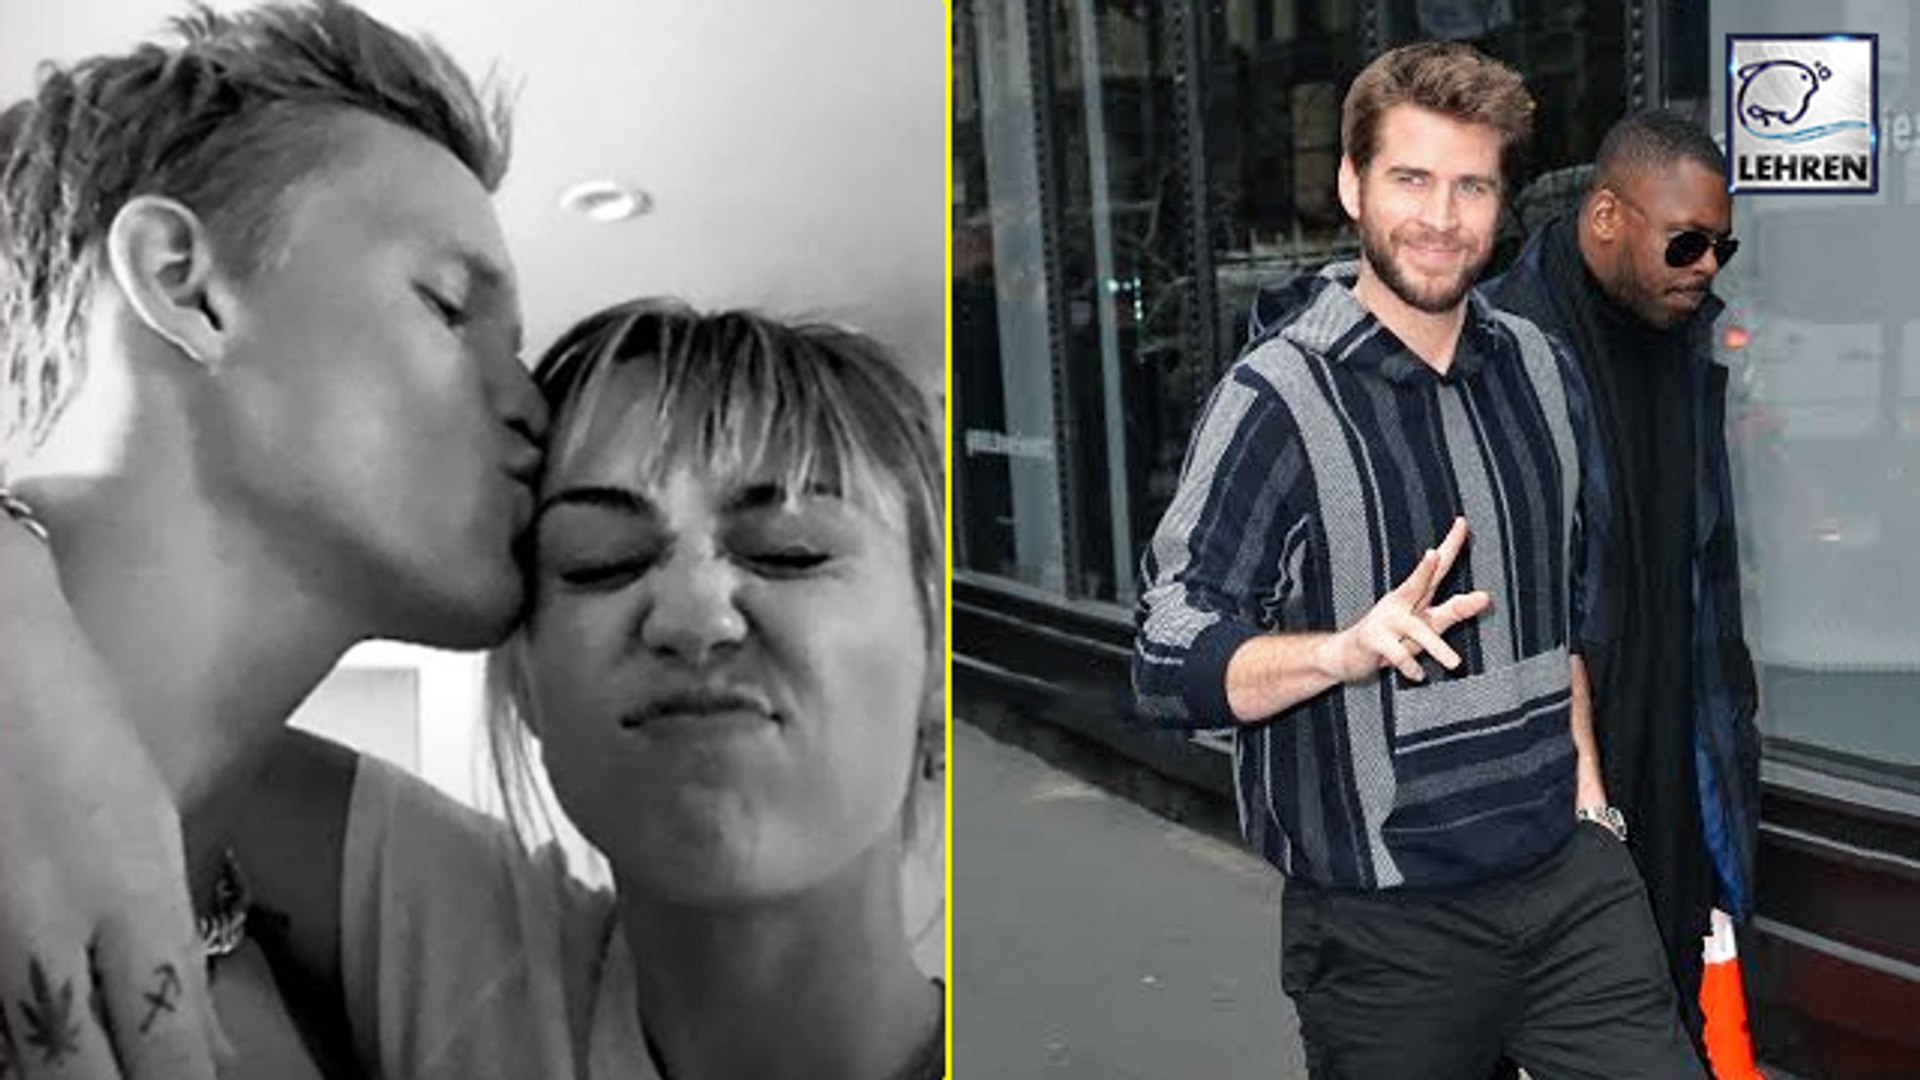 Miley Cyrus Makes A Joke On Her Short Marriage With Liam Hemsworth 4 Months After Split